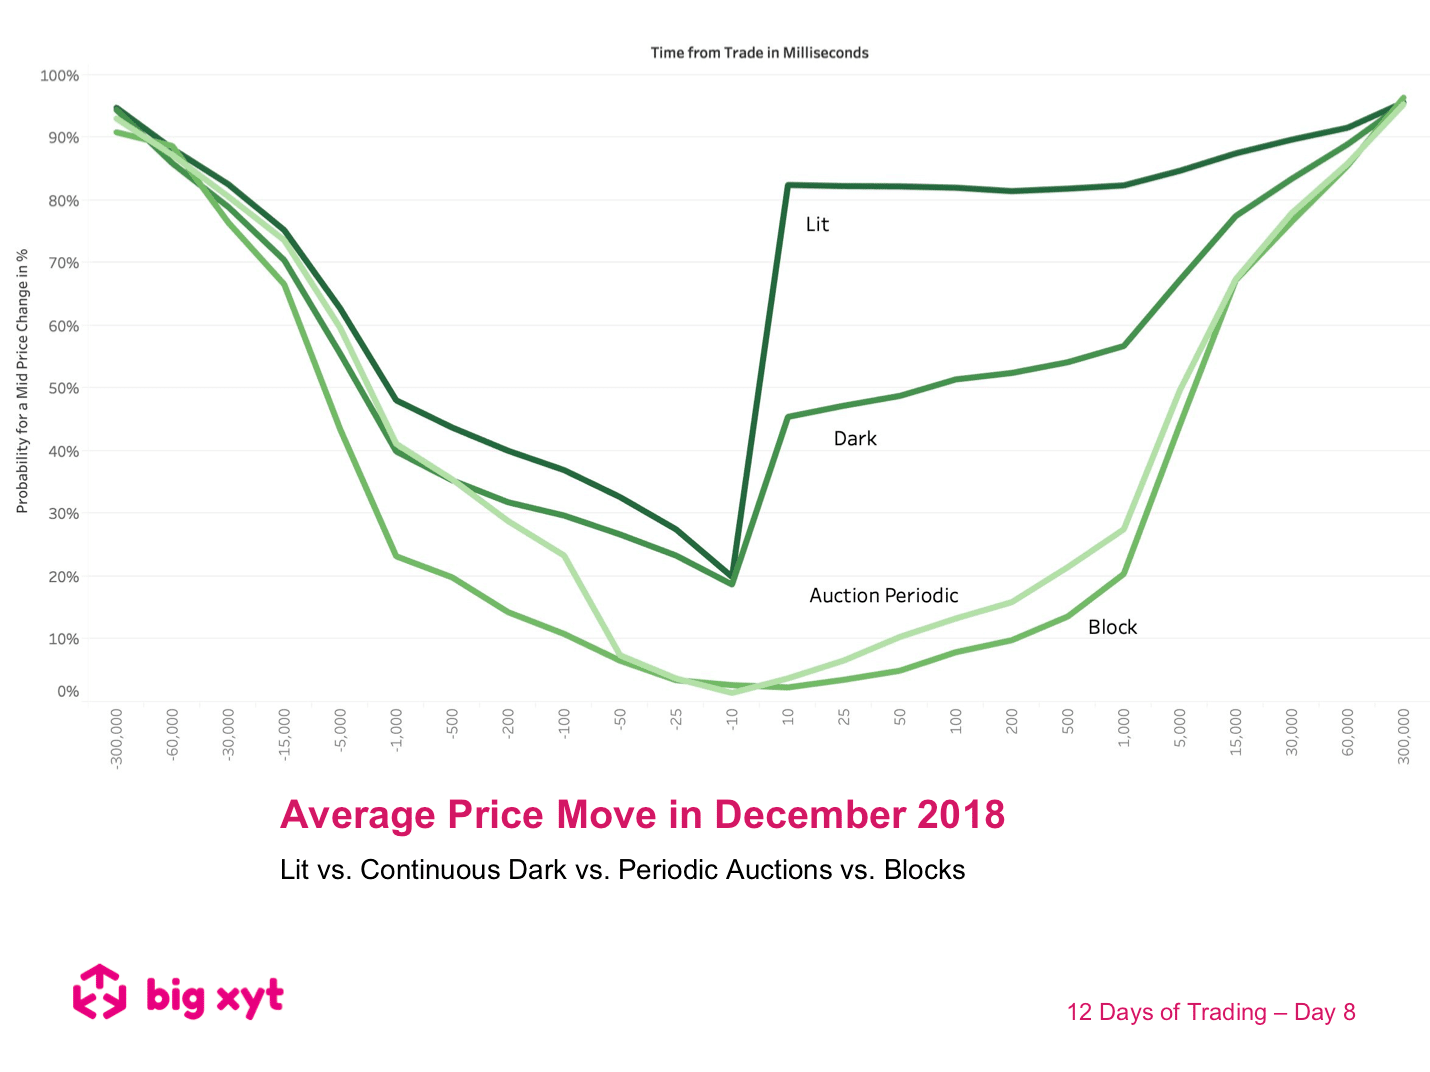 12 Days of Trading – Day 8 of 12: Average Price Move